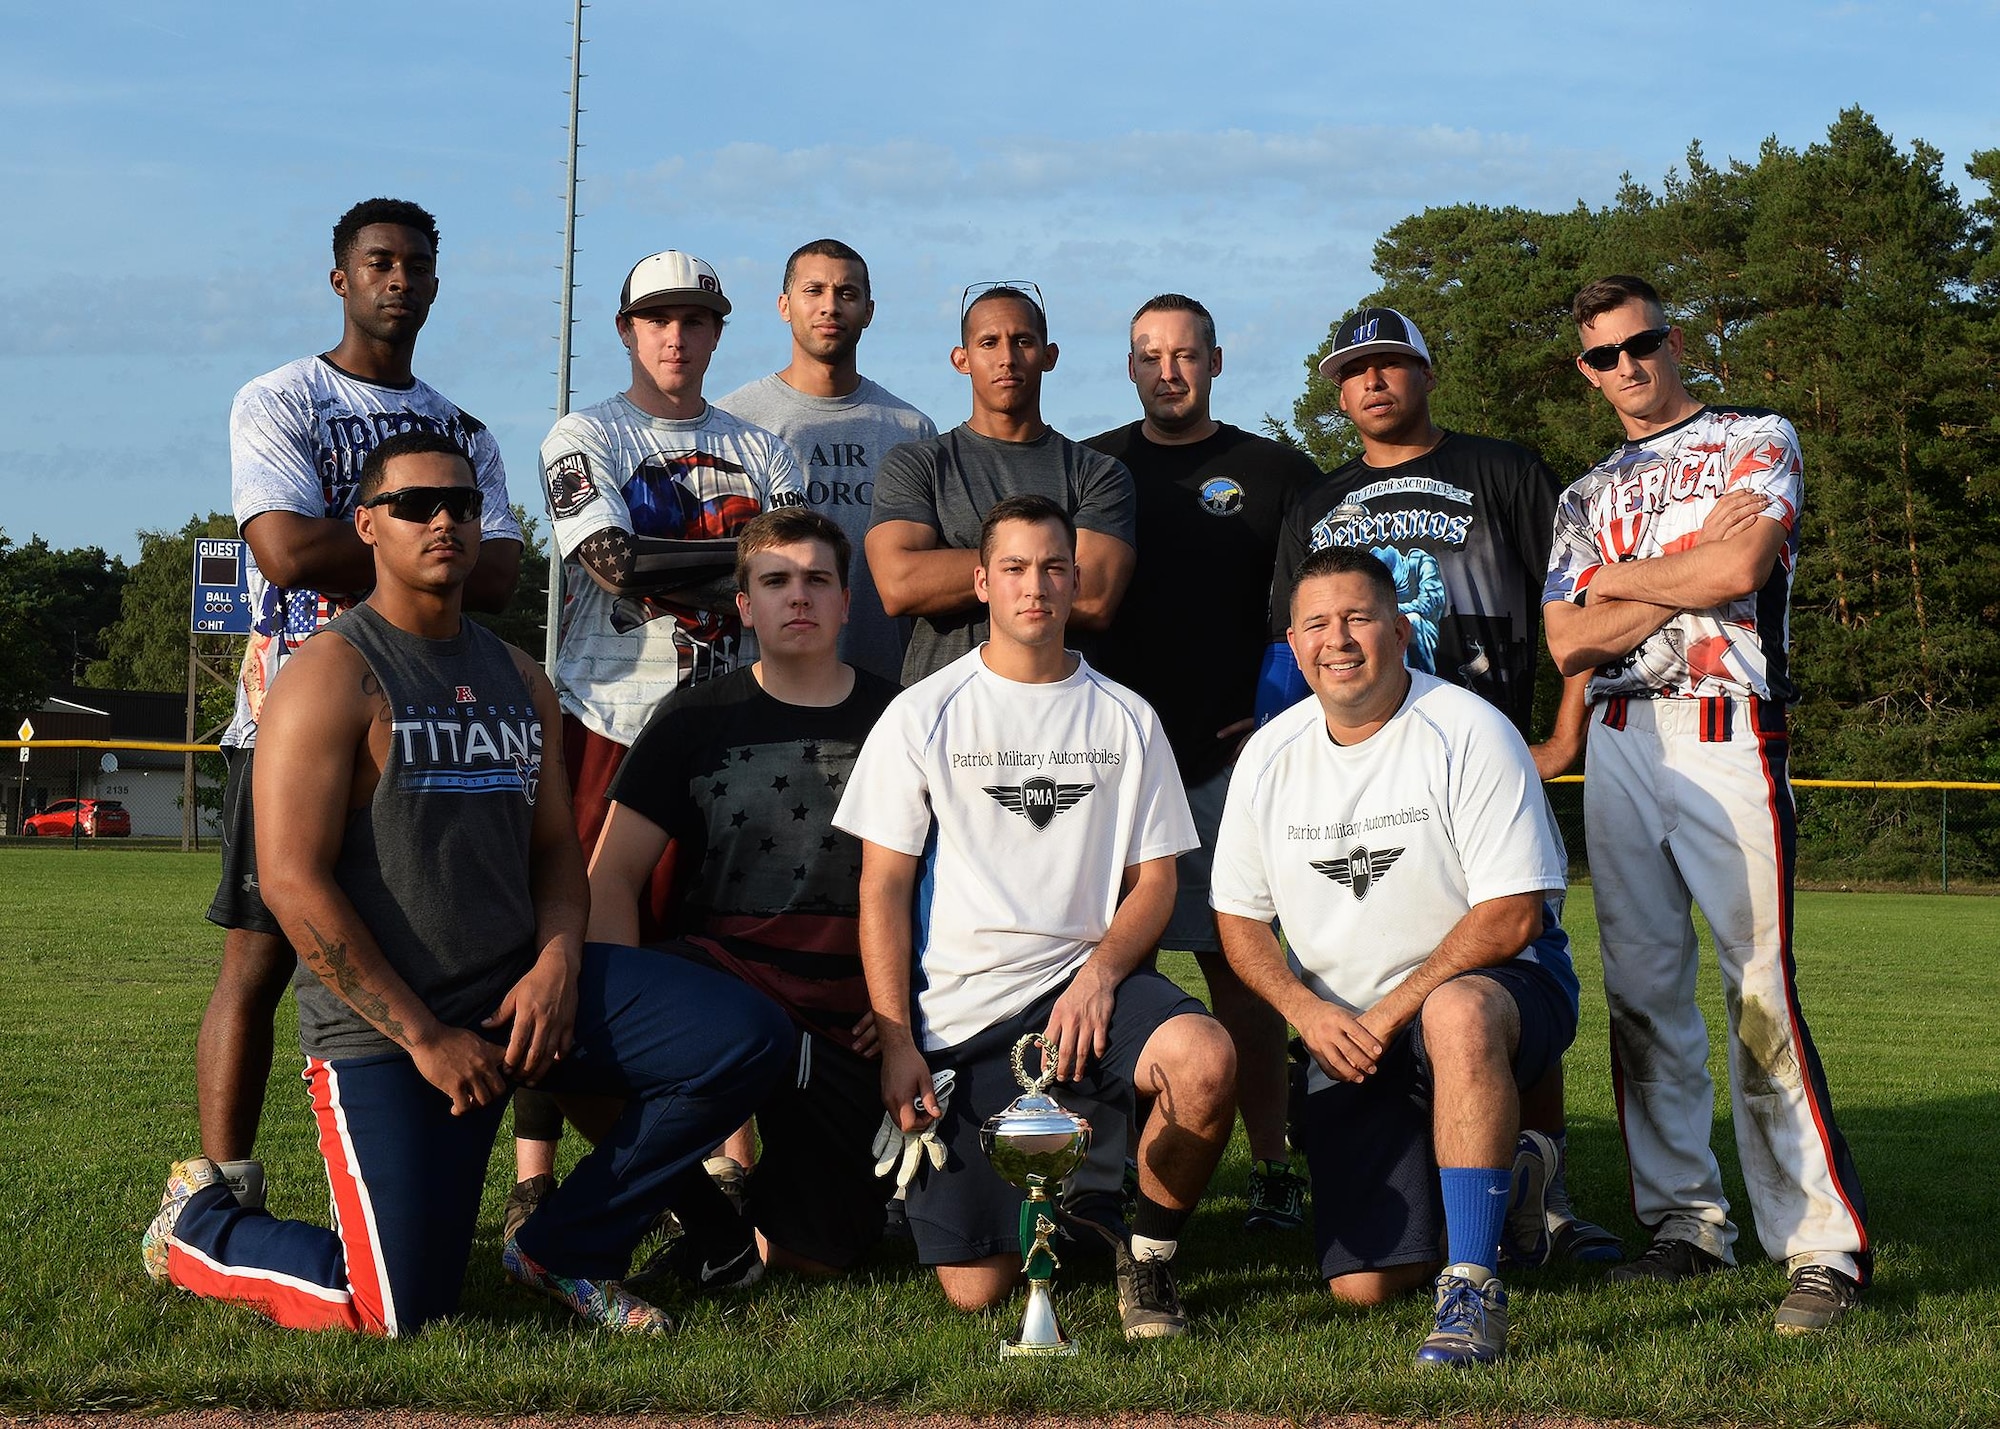 Members of the 86th Maintenance Squadron softball team pose for a photo after winning the intramural softball championship game on Ramstein Air Base, Germany, Aug. 23, 2017. During the championship game, the 86th MXS plated the 786th Force Support Squadron and emerged victorious by scoring 25 total runs. (U.S. Air Force photo by Senior Airman Jimmie D. Pike)